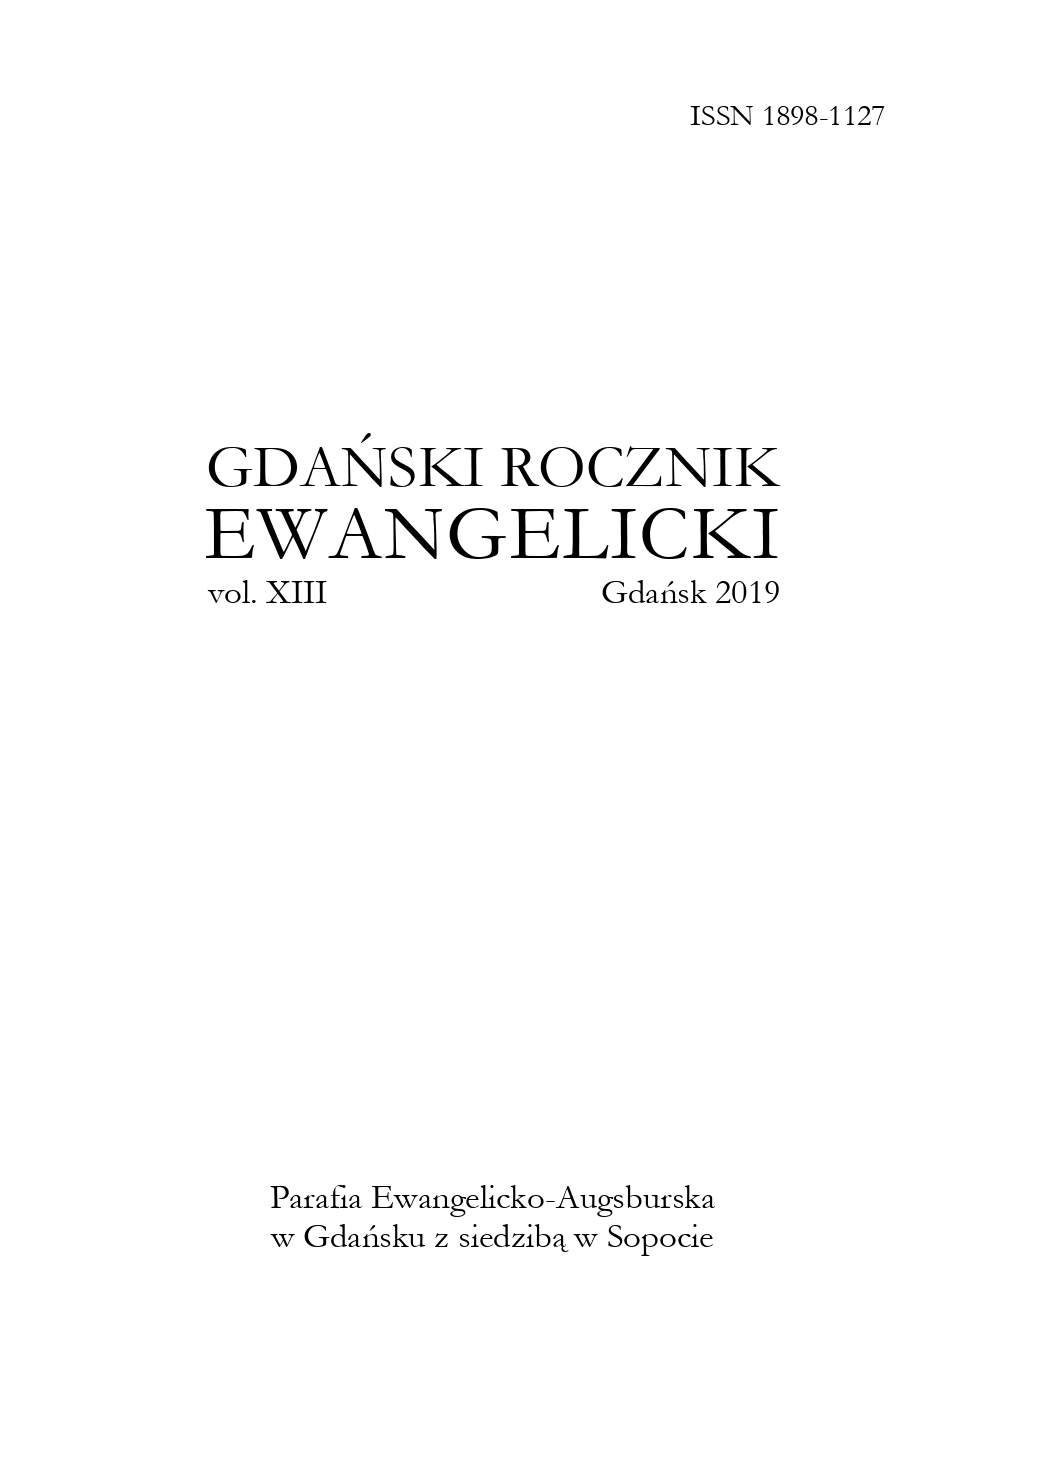 An Analysis of Selected Upbuilding Discourses in the Works of Søren Kierkegaard in the Context of Evangelical Homiletics Cover Image